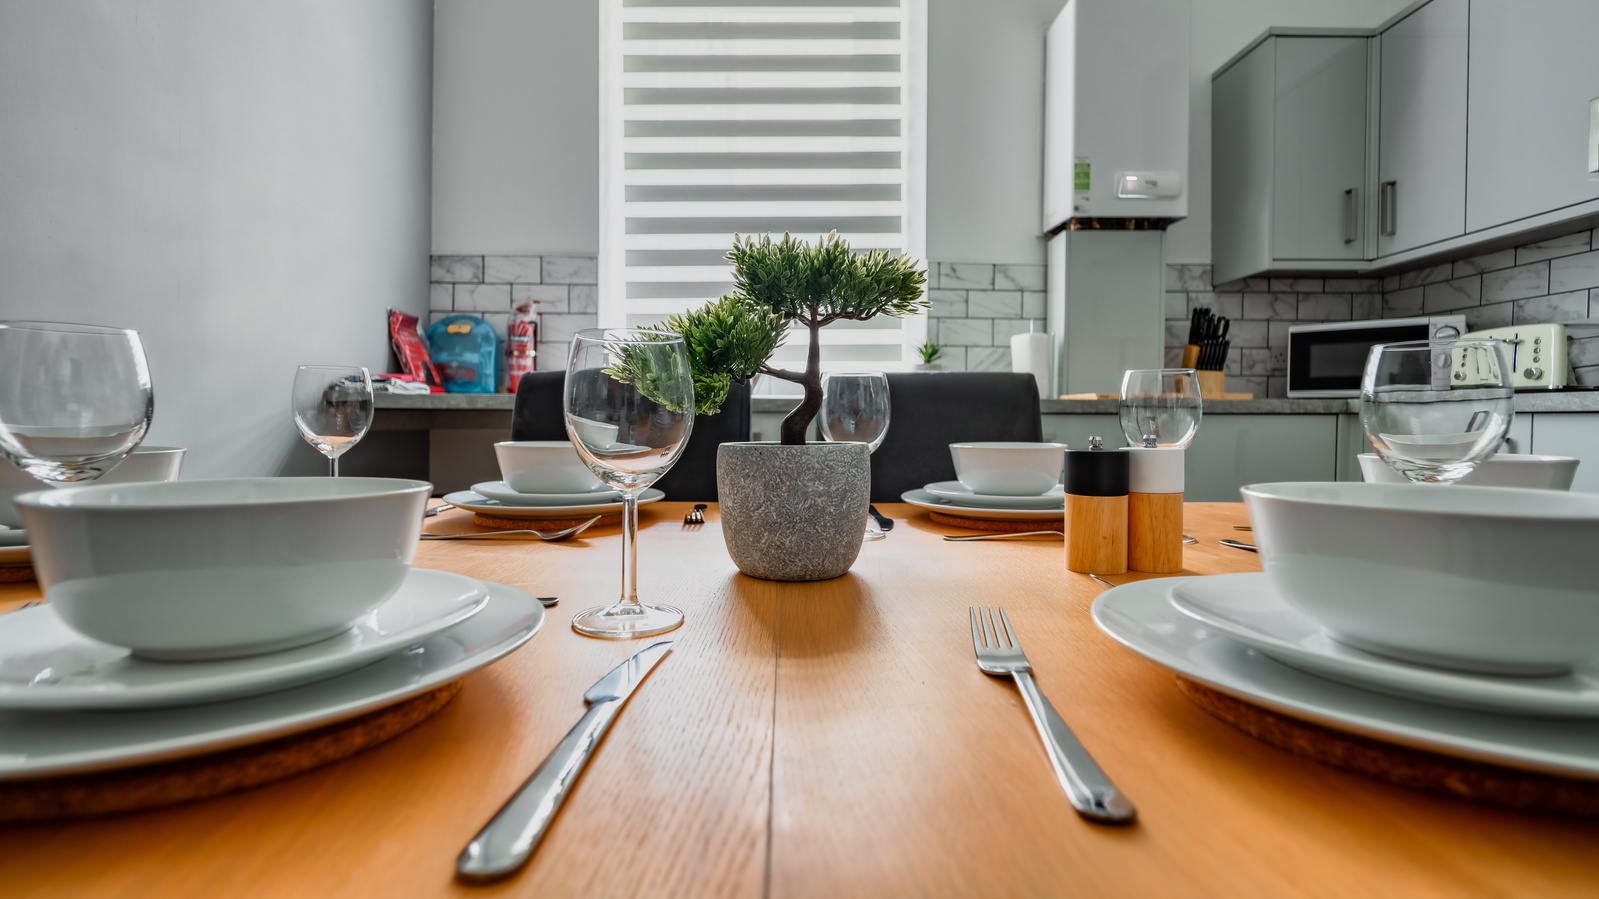 Dining Room Table for Scotland Interior Property in Glasgow - Photography by Nate Cleary